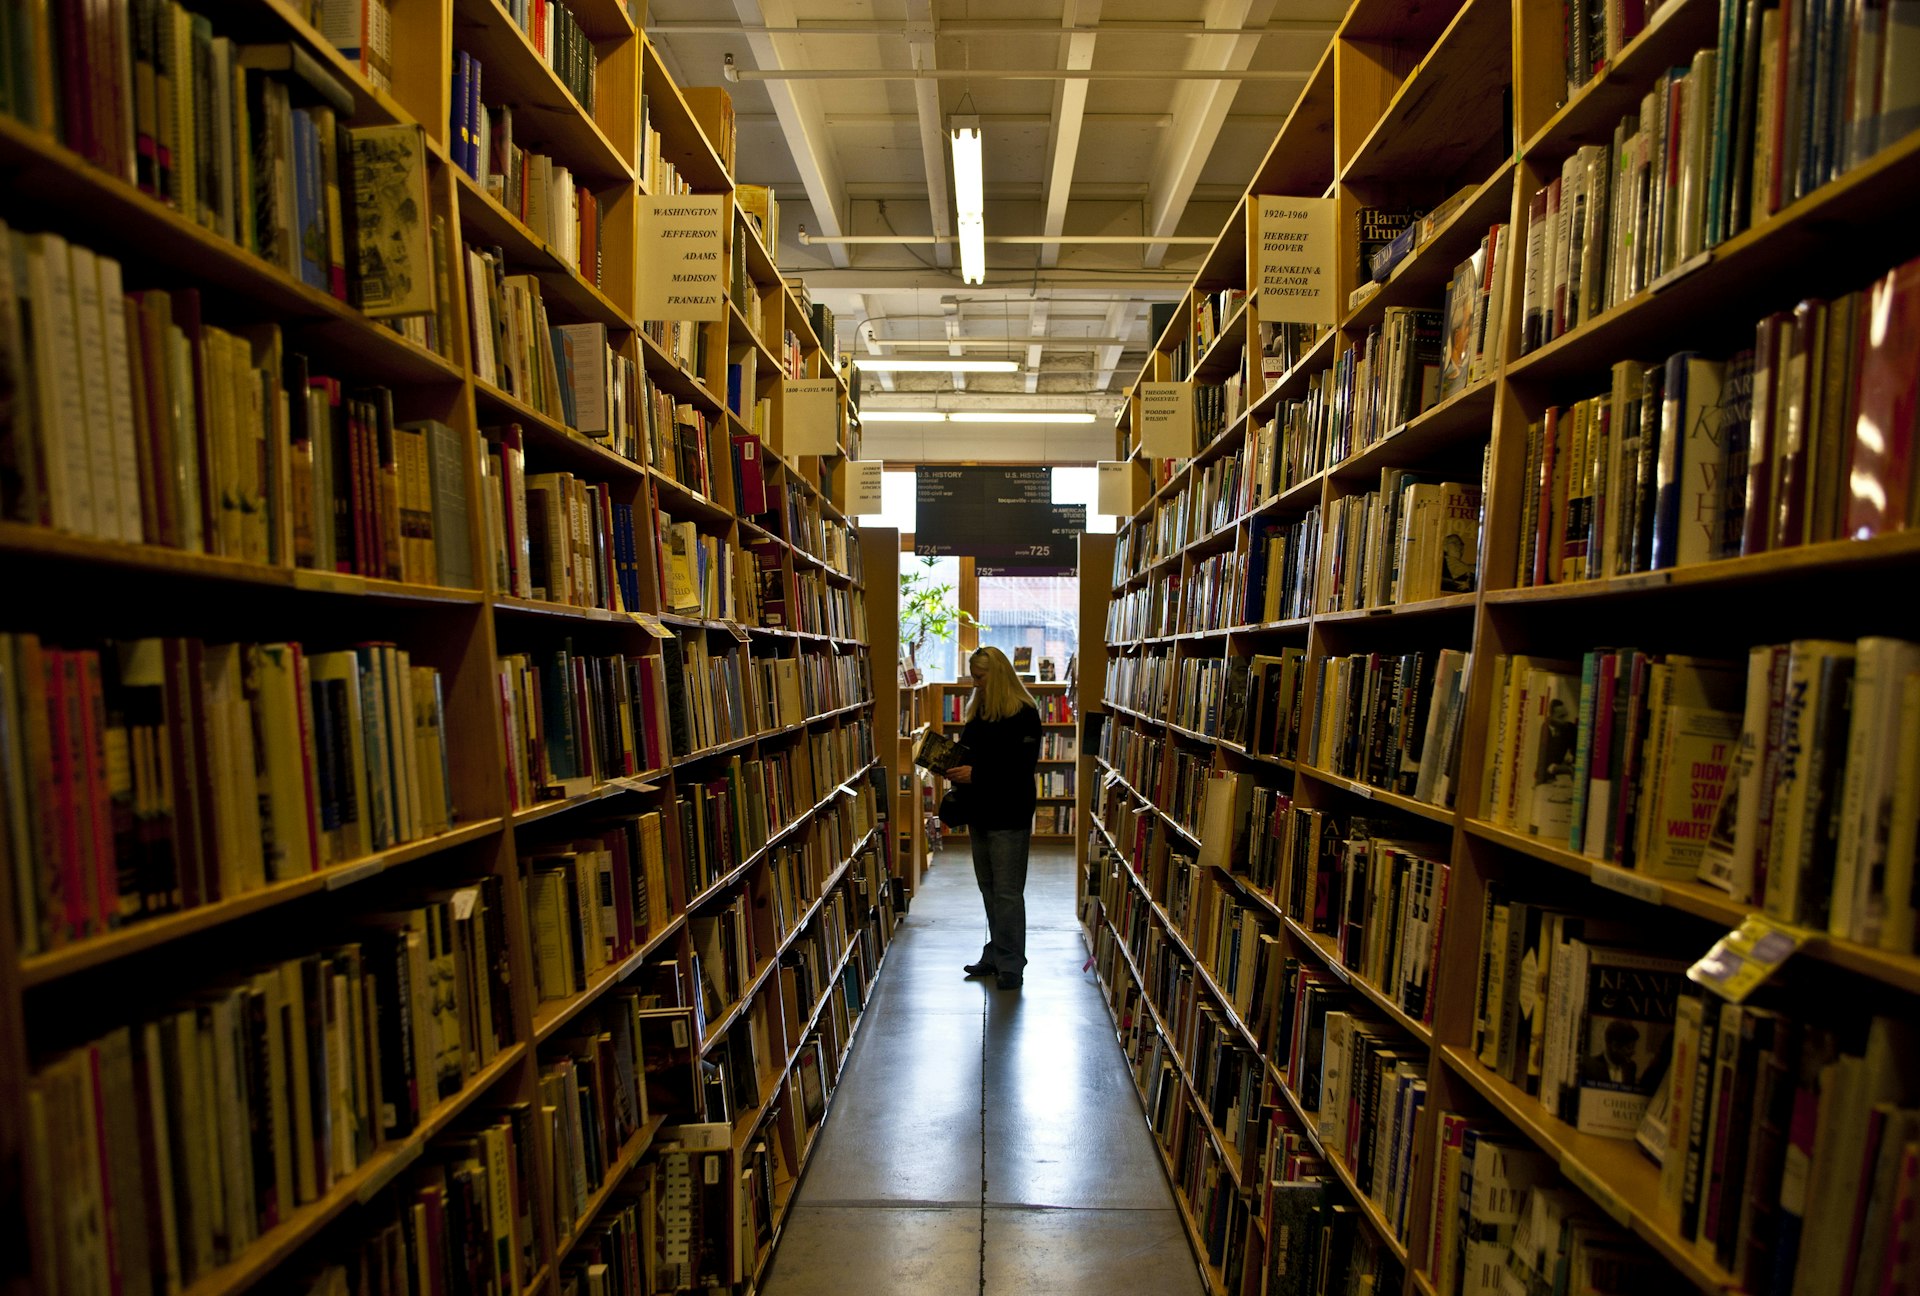 A woman peeks into a book at the end of a long row of bookshelves on the ground floor of Powell's City of Books in Portland, Oregon